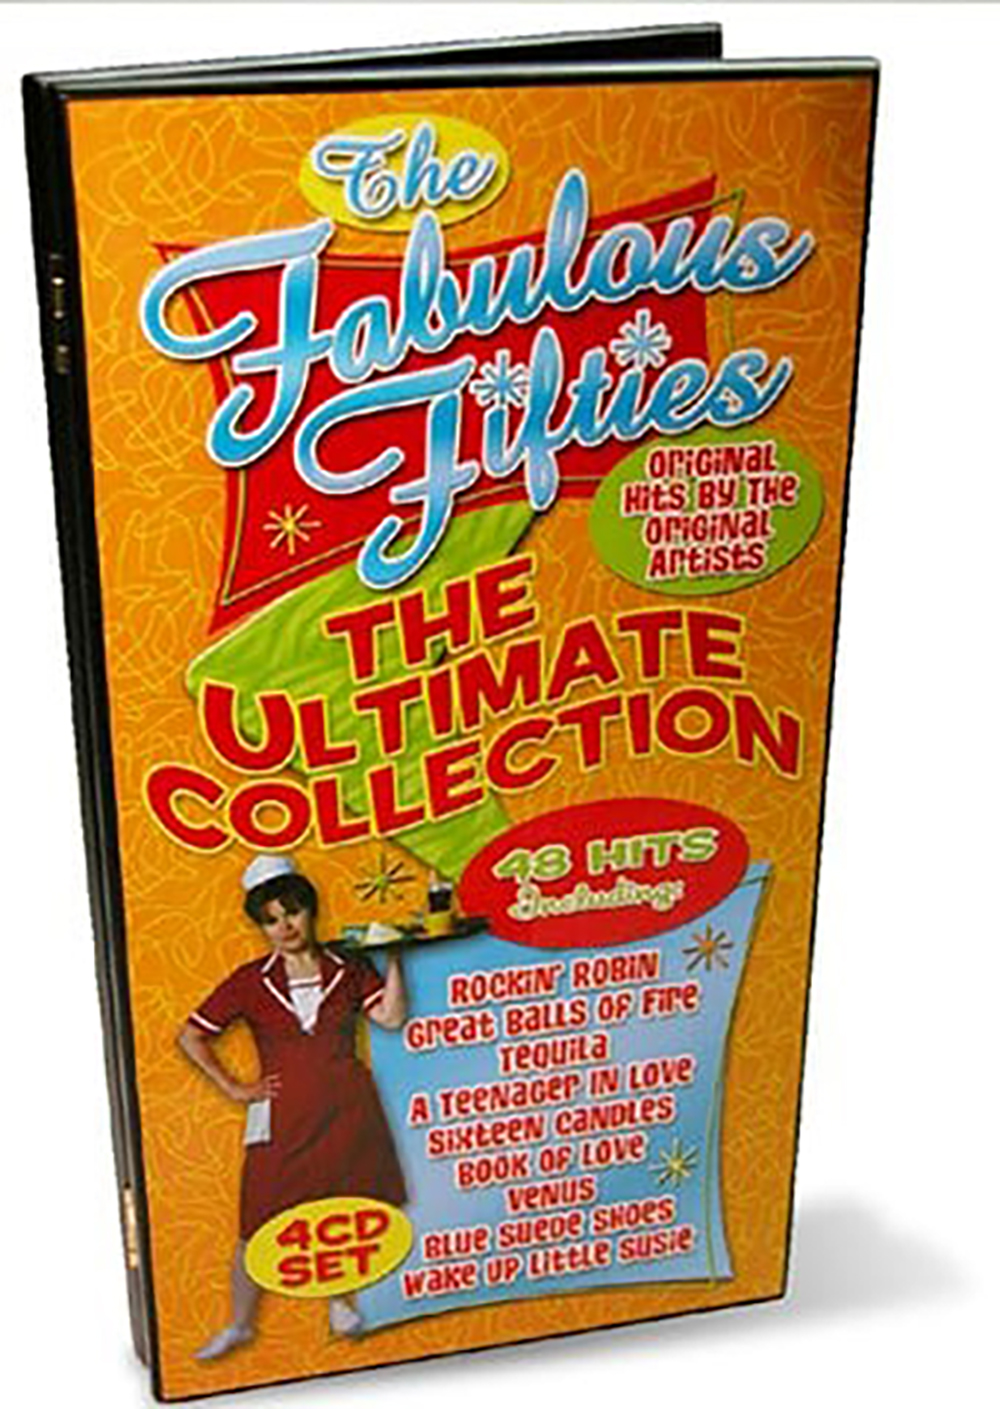 Fabulous Fifties, Ultimate Collection (4 CD)